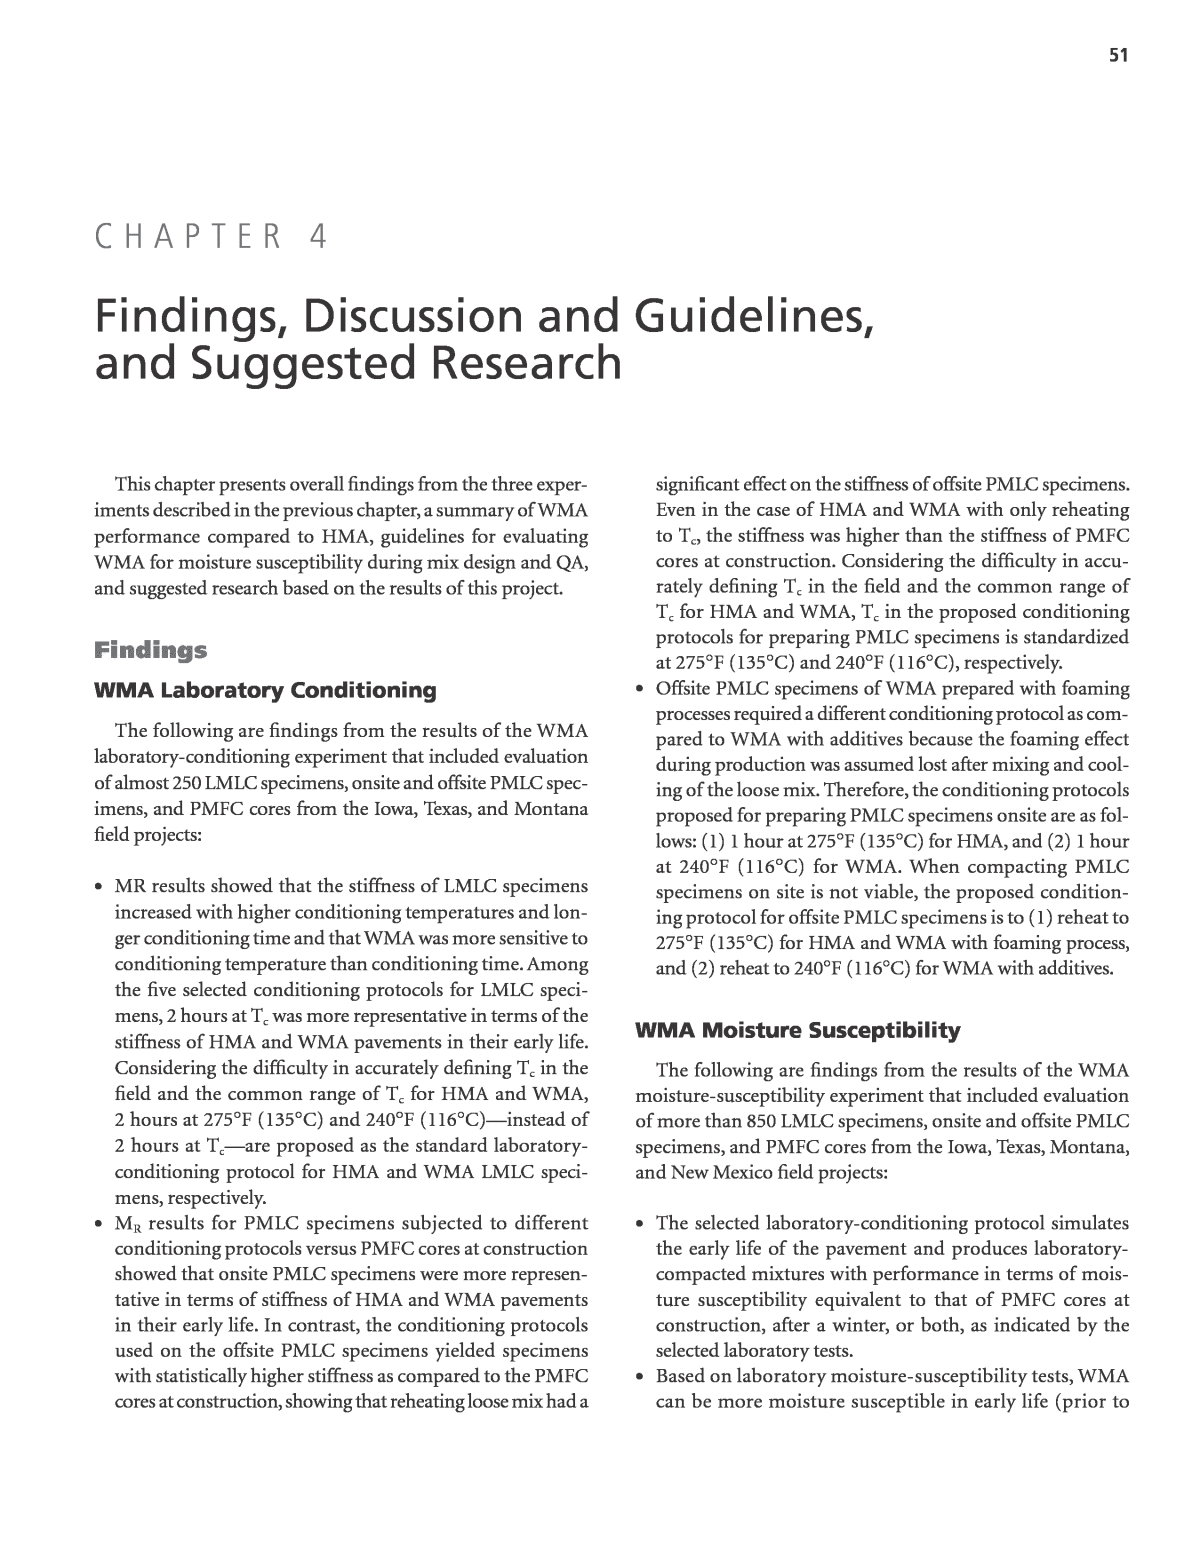 discussion of finding in research